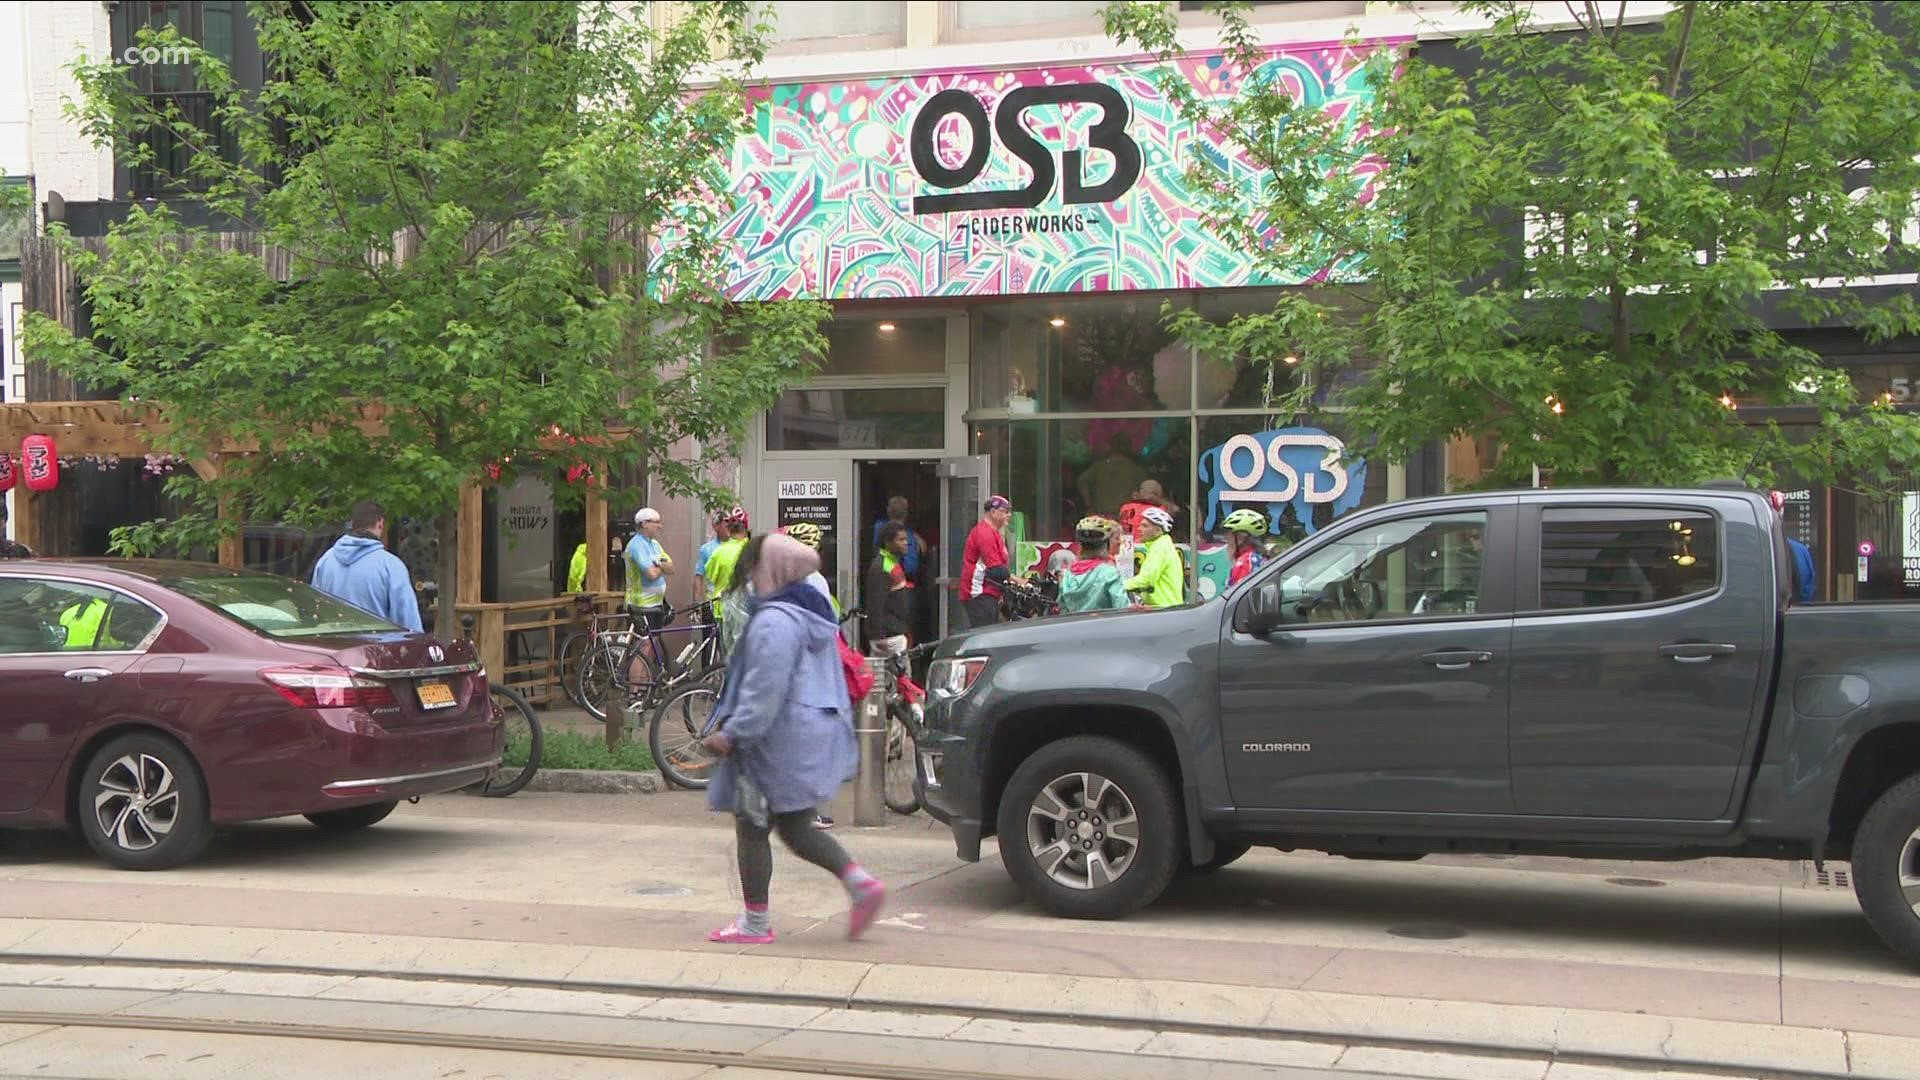 The Buffalo Slow Roll hosted a pedal party starting at OSB Cider Works. They say the annual tradition helps bring more people out for the marathon weekend.